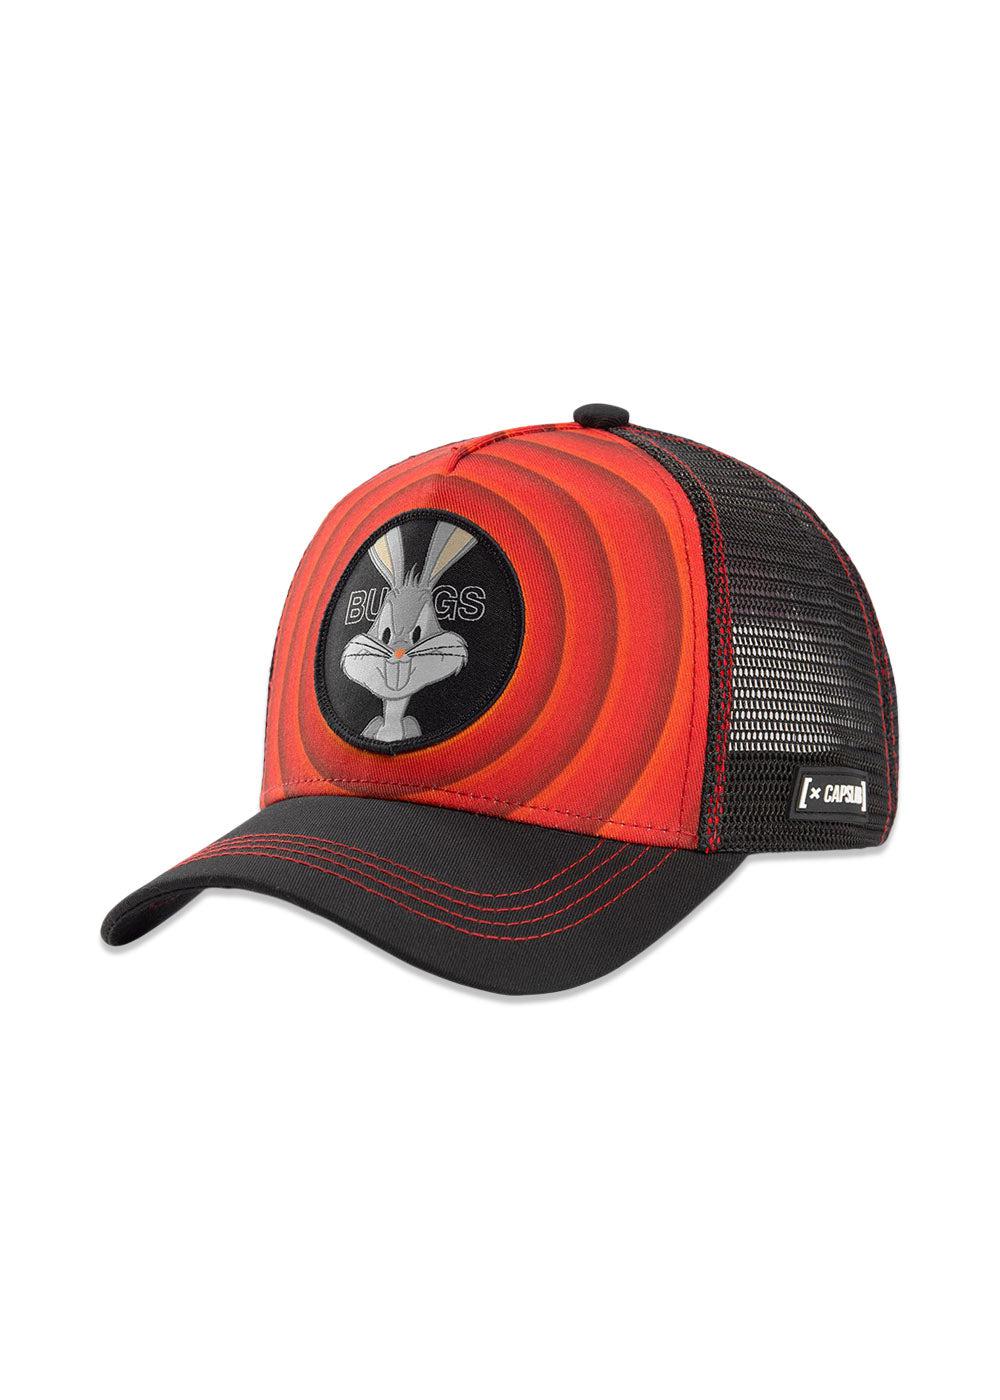 CL LOONEY TUNES BUG1 - Red-Black